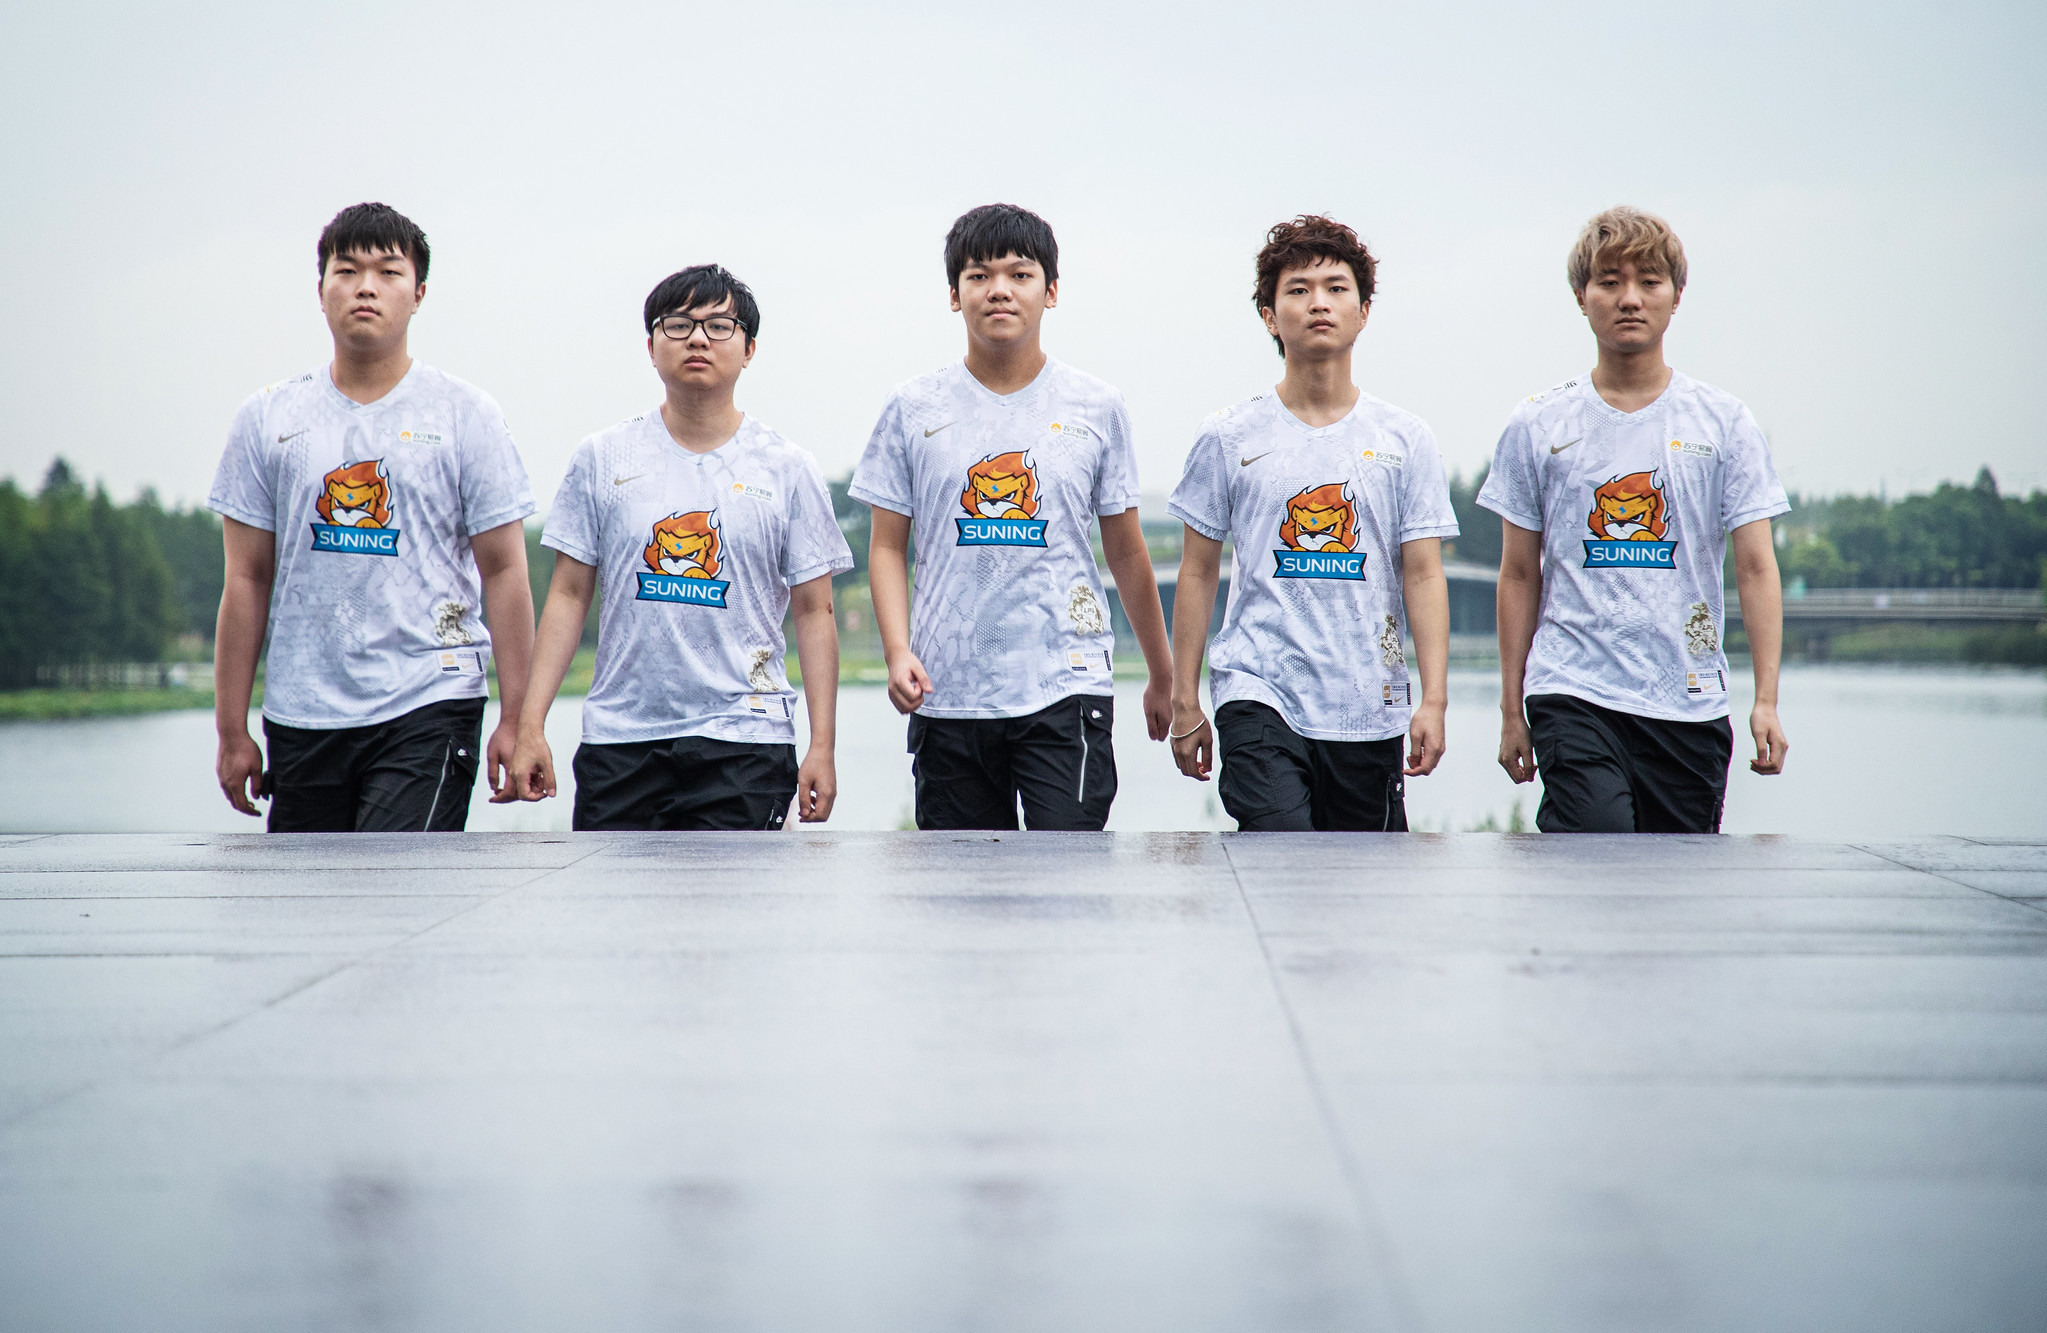 Suning Defeated Top Esports To Secure World Championship Finals Spot Against DAMWON Gaming